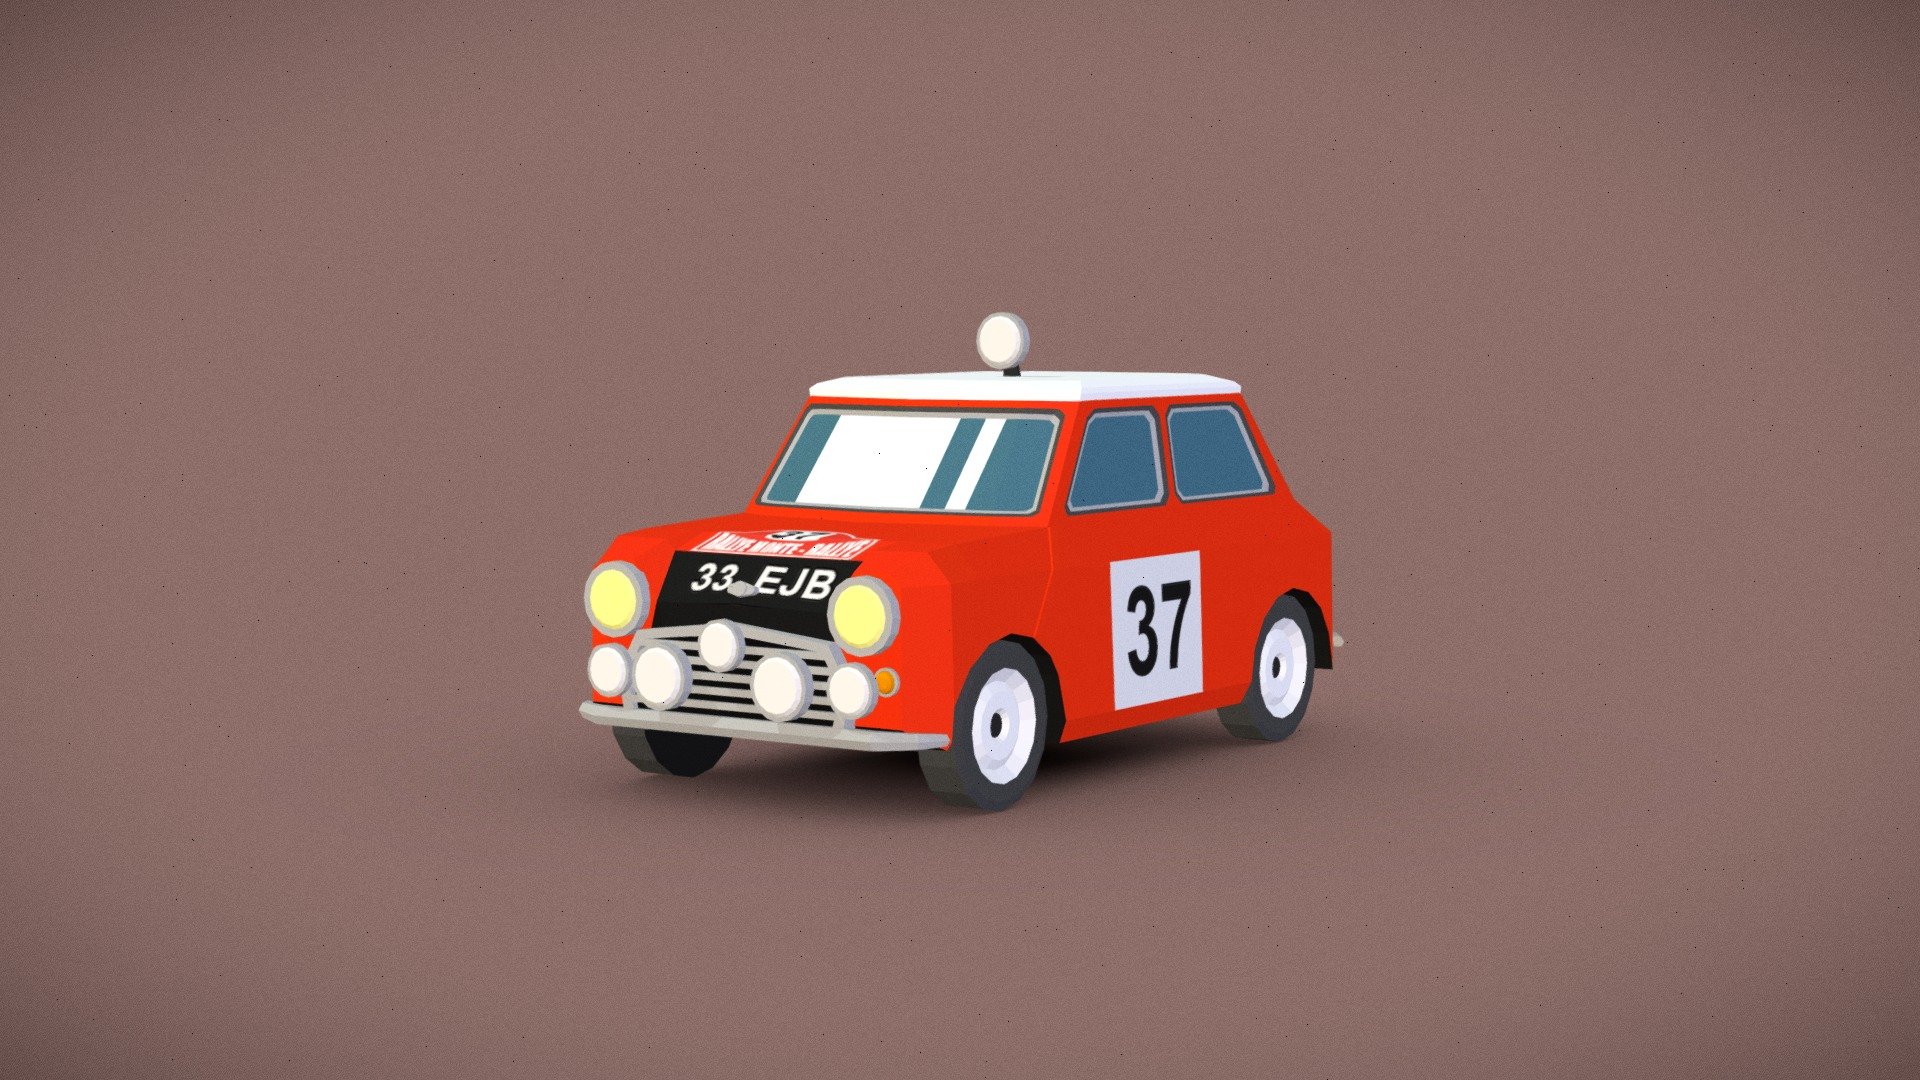 The low poly small classic cartoon rally car from 1960s in red color with rally decals.

The model is flat shaded low poly colored with a texture. 
Can be easily recolored. 
Optimized for mobile games 3d model